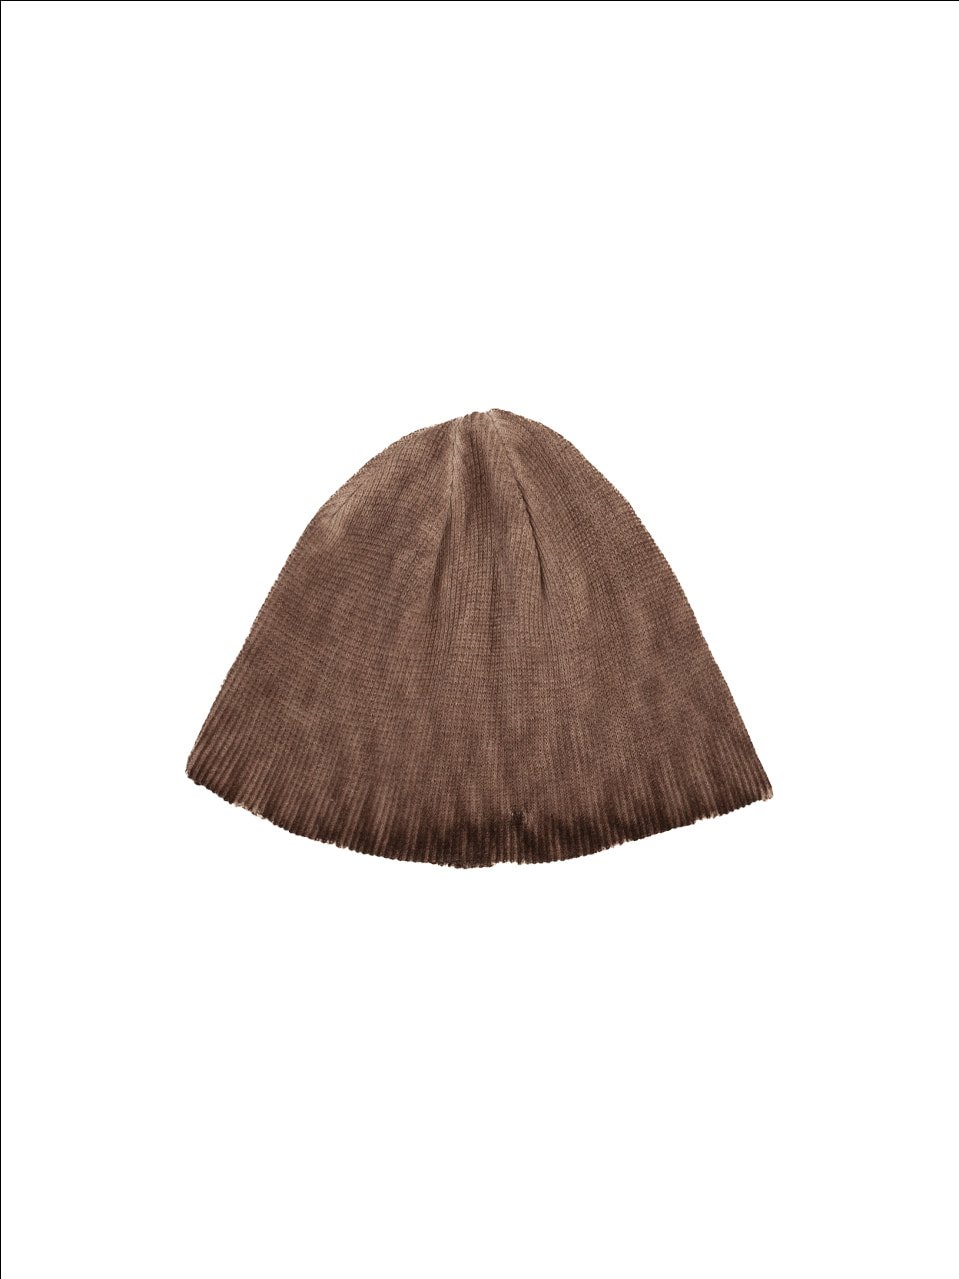 Destroyed Washed Beanie_[Brown]